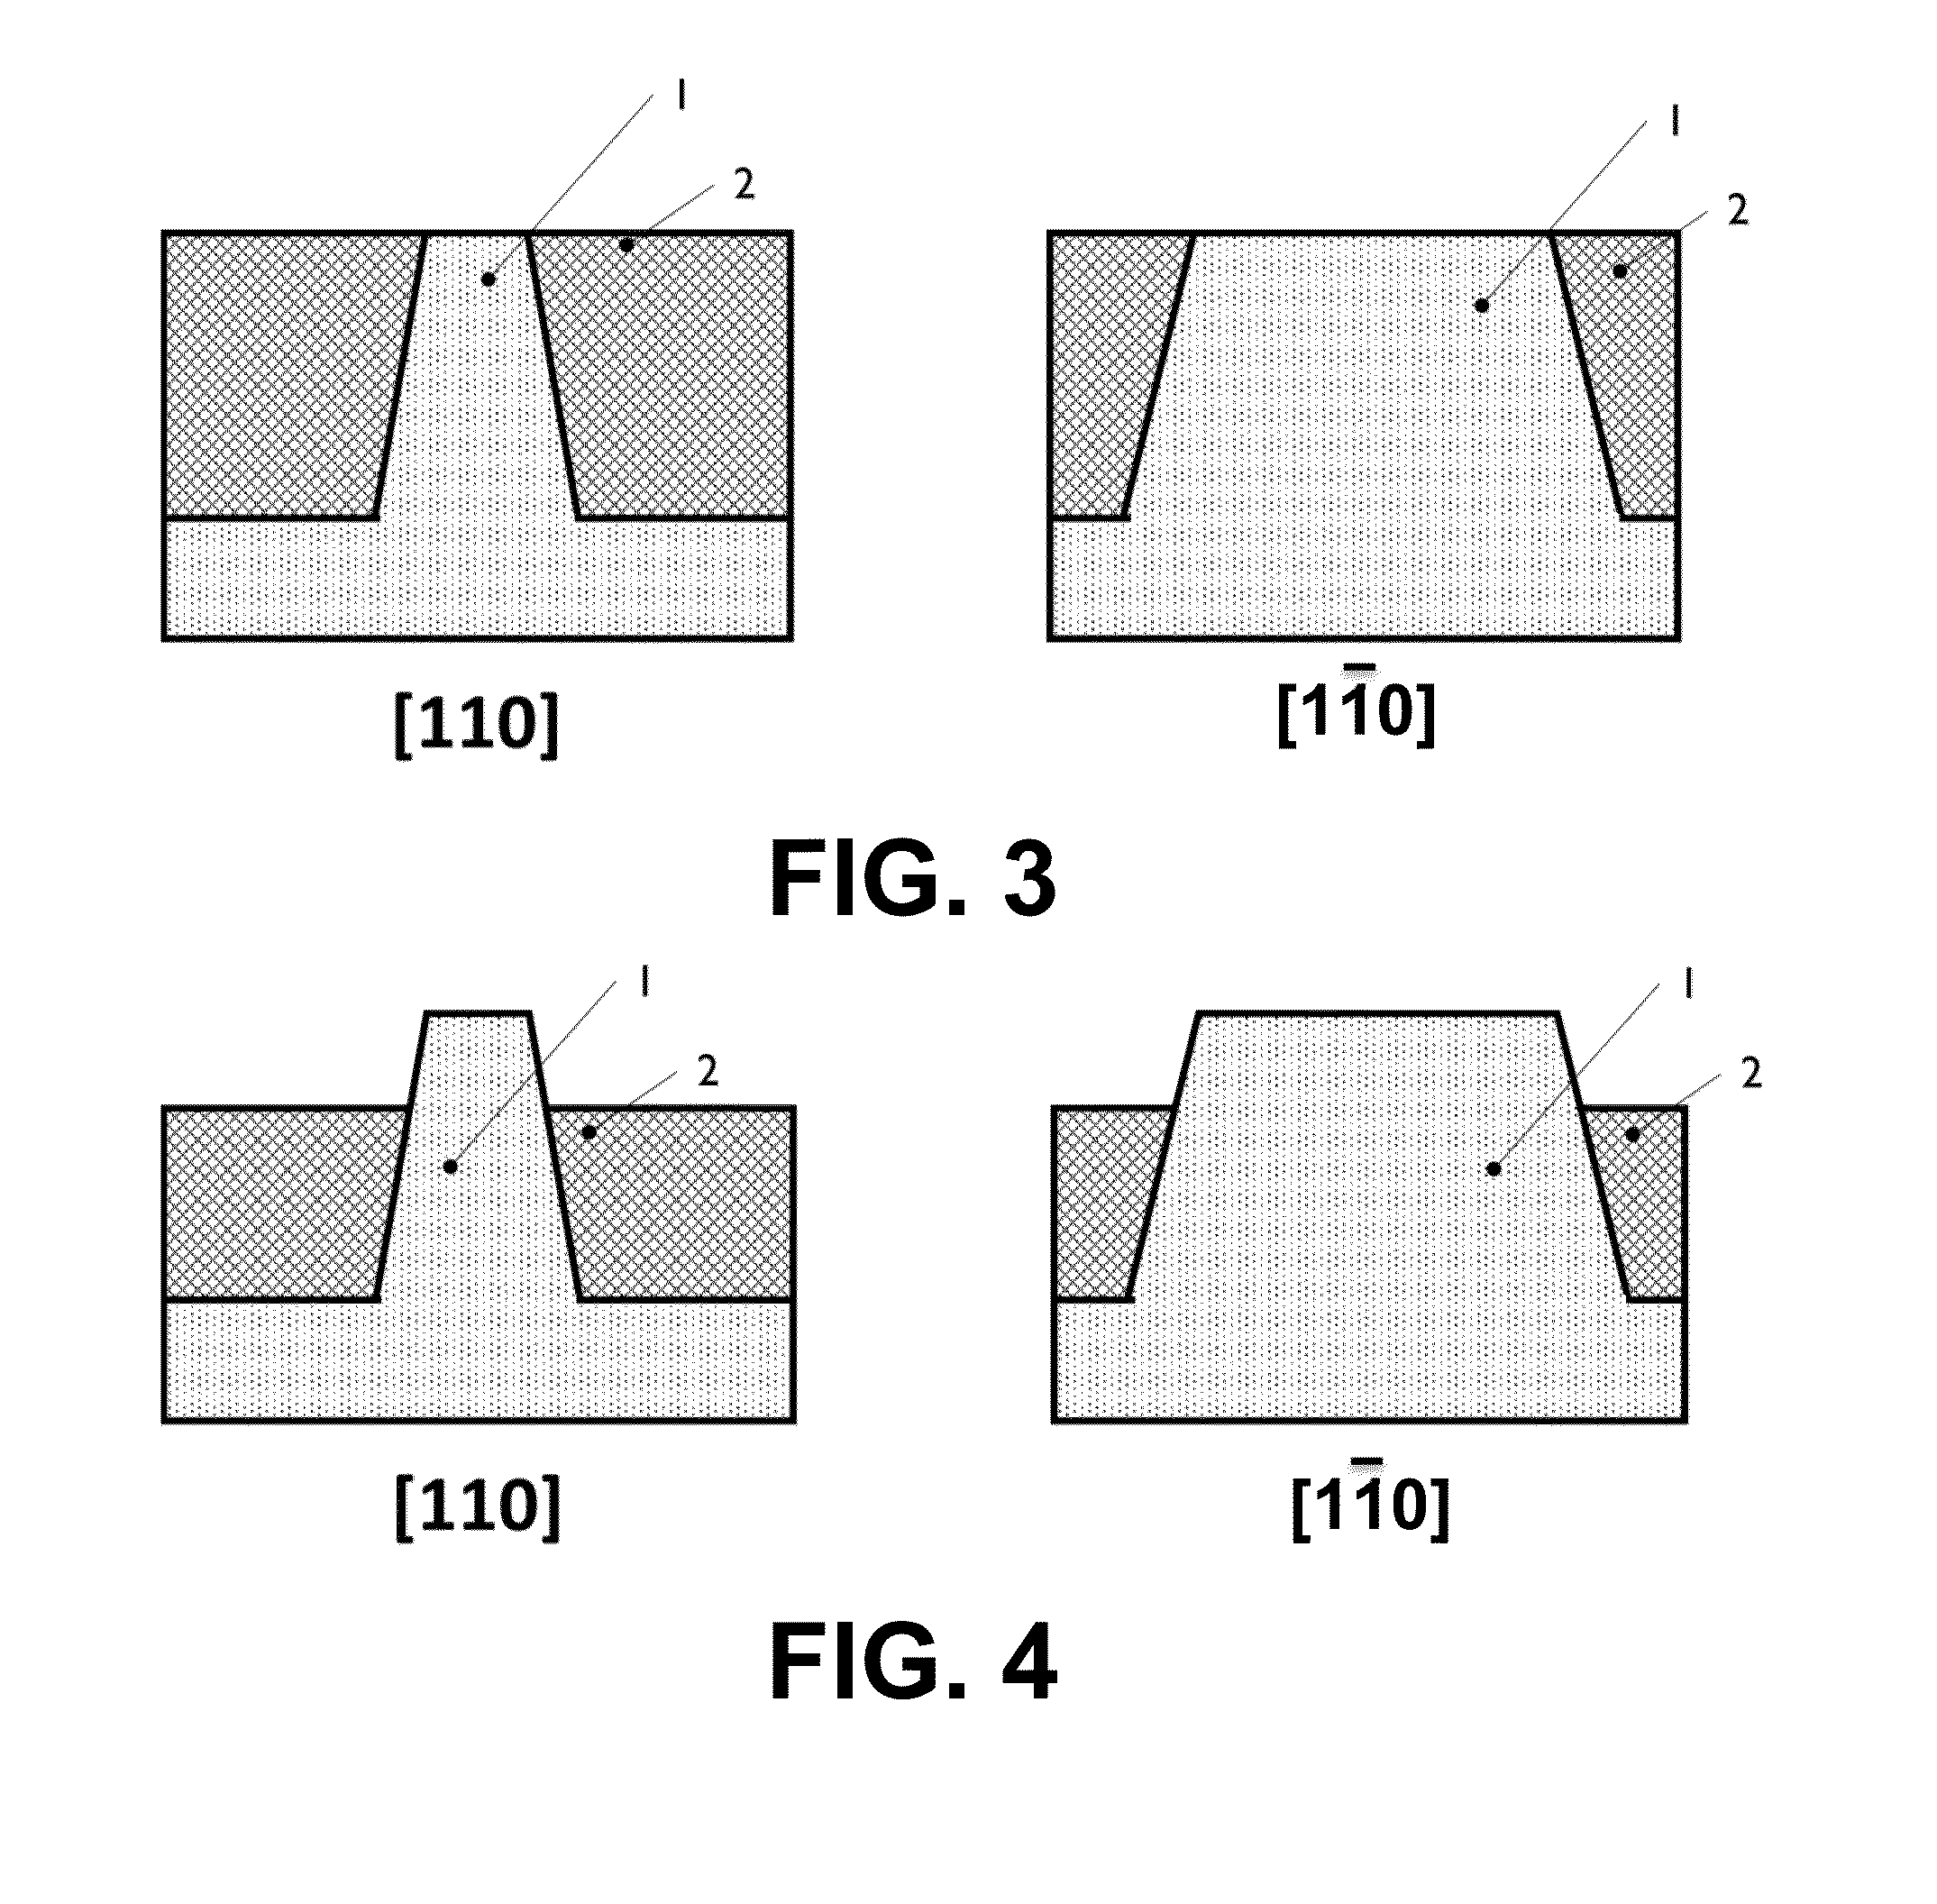 Method for Reducing Contact Resistance in MOS